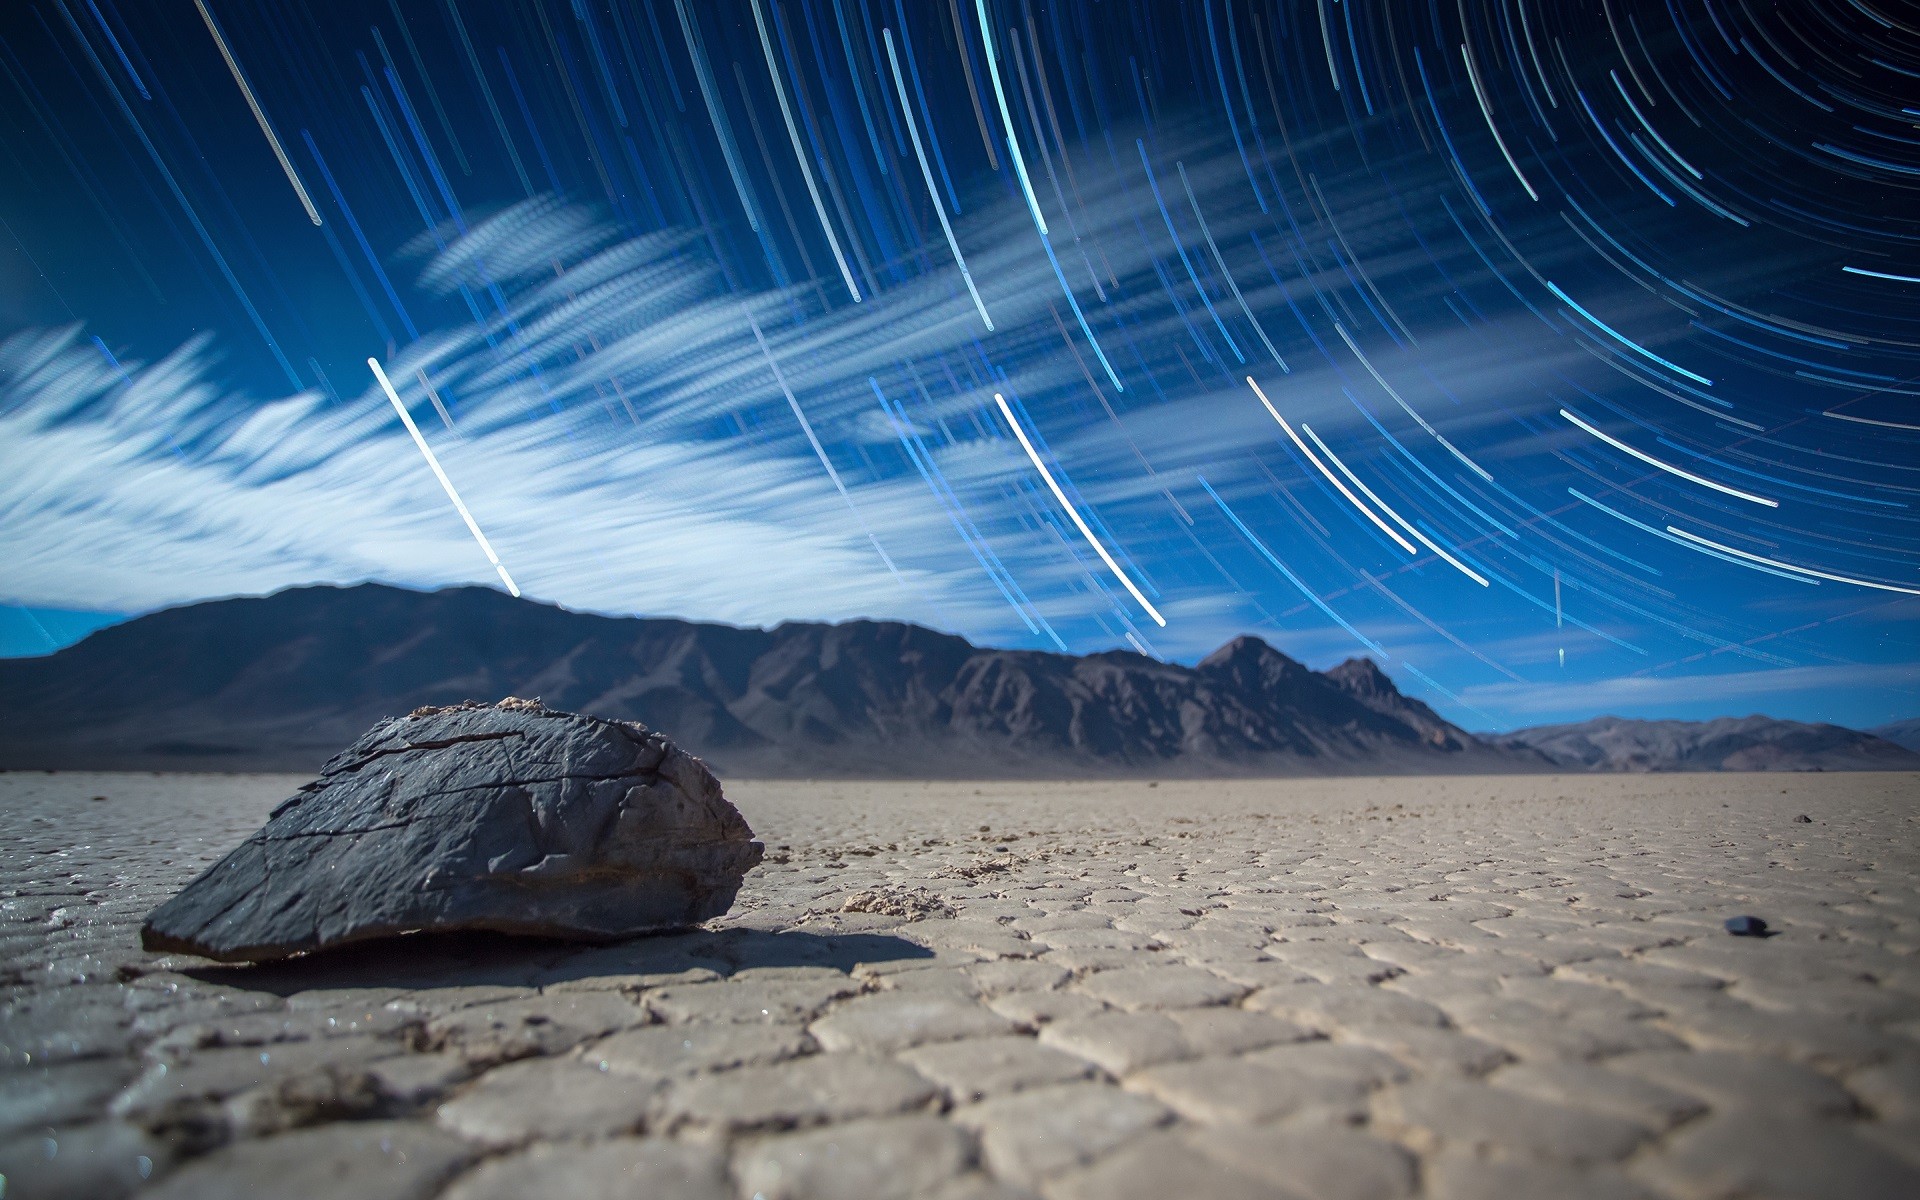 Nature Landscape Abstract Rock Desert Hills Long Exposure Star Trails Worms Eye View Depth Of Field  1920x1200